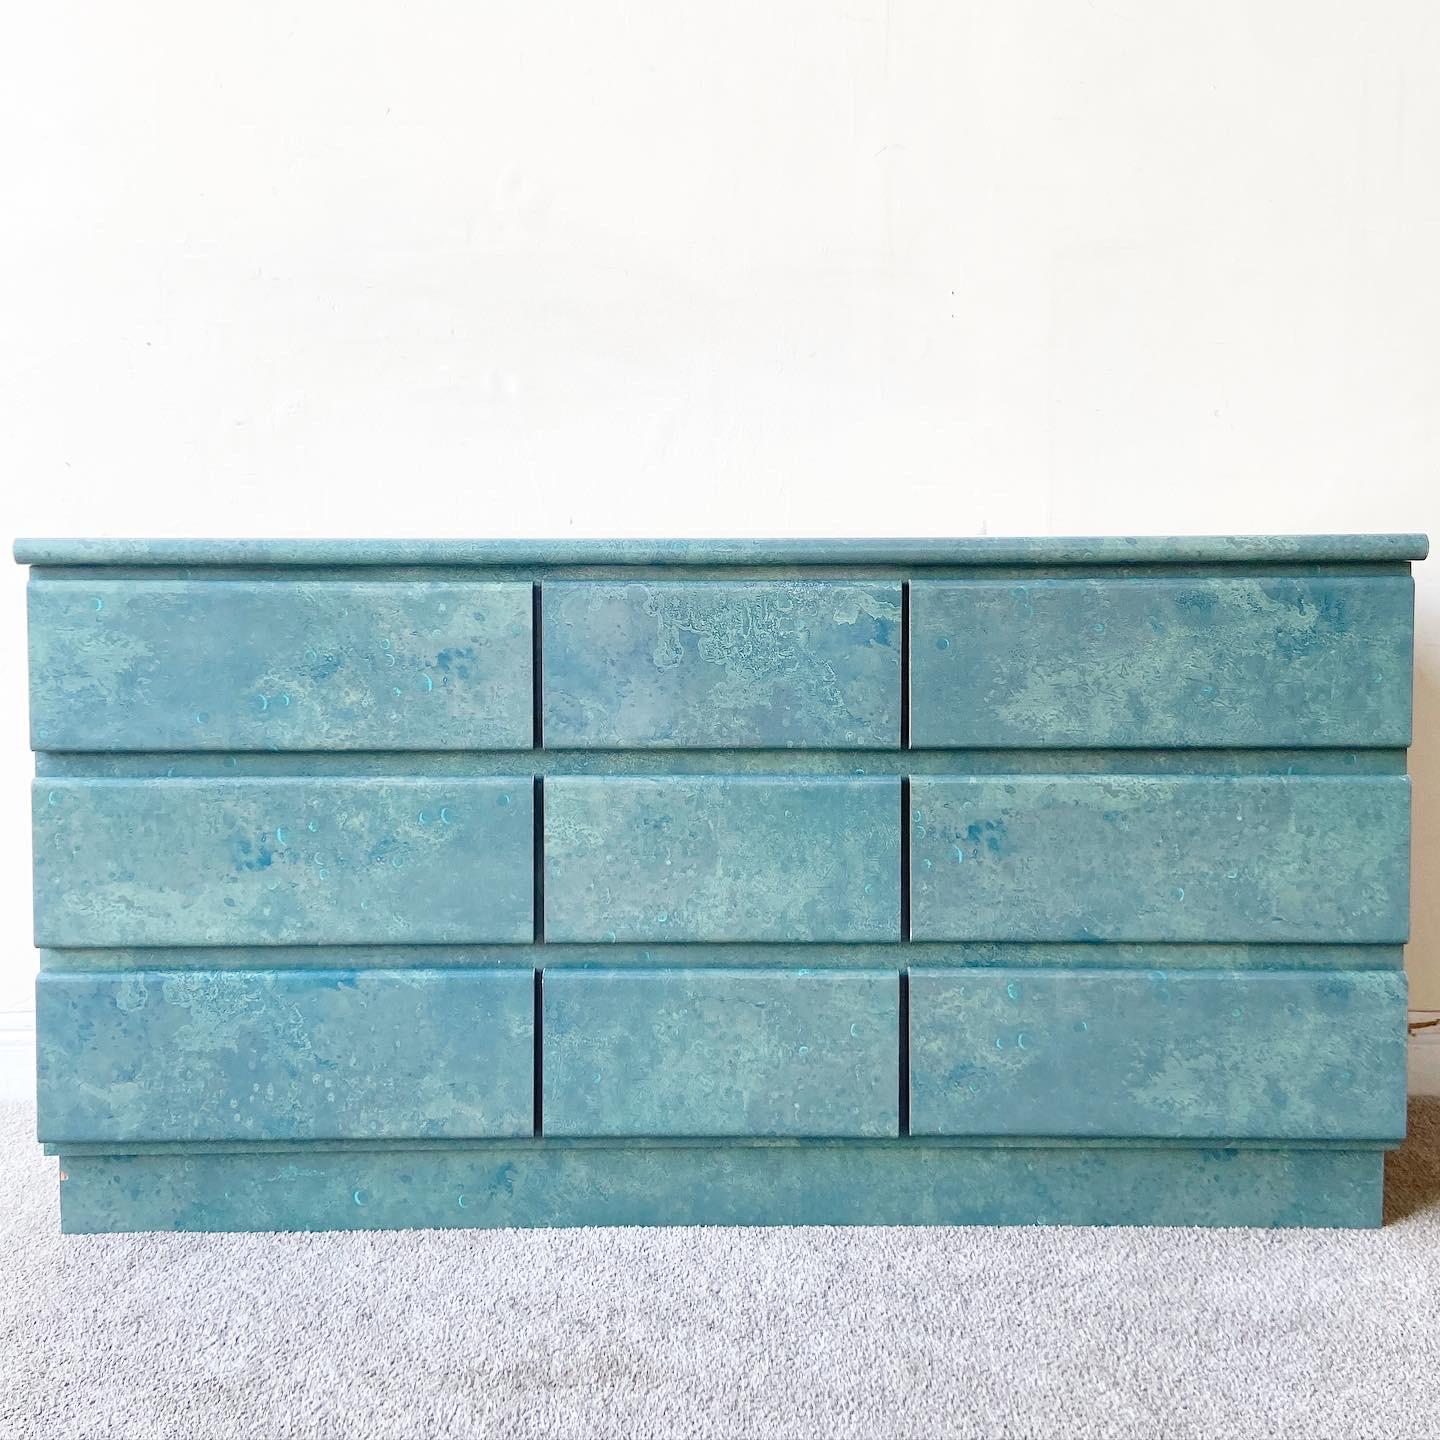 American Postmodern Aquaponic Lacquer Laminate Dresser - 9 Drawers